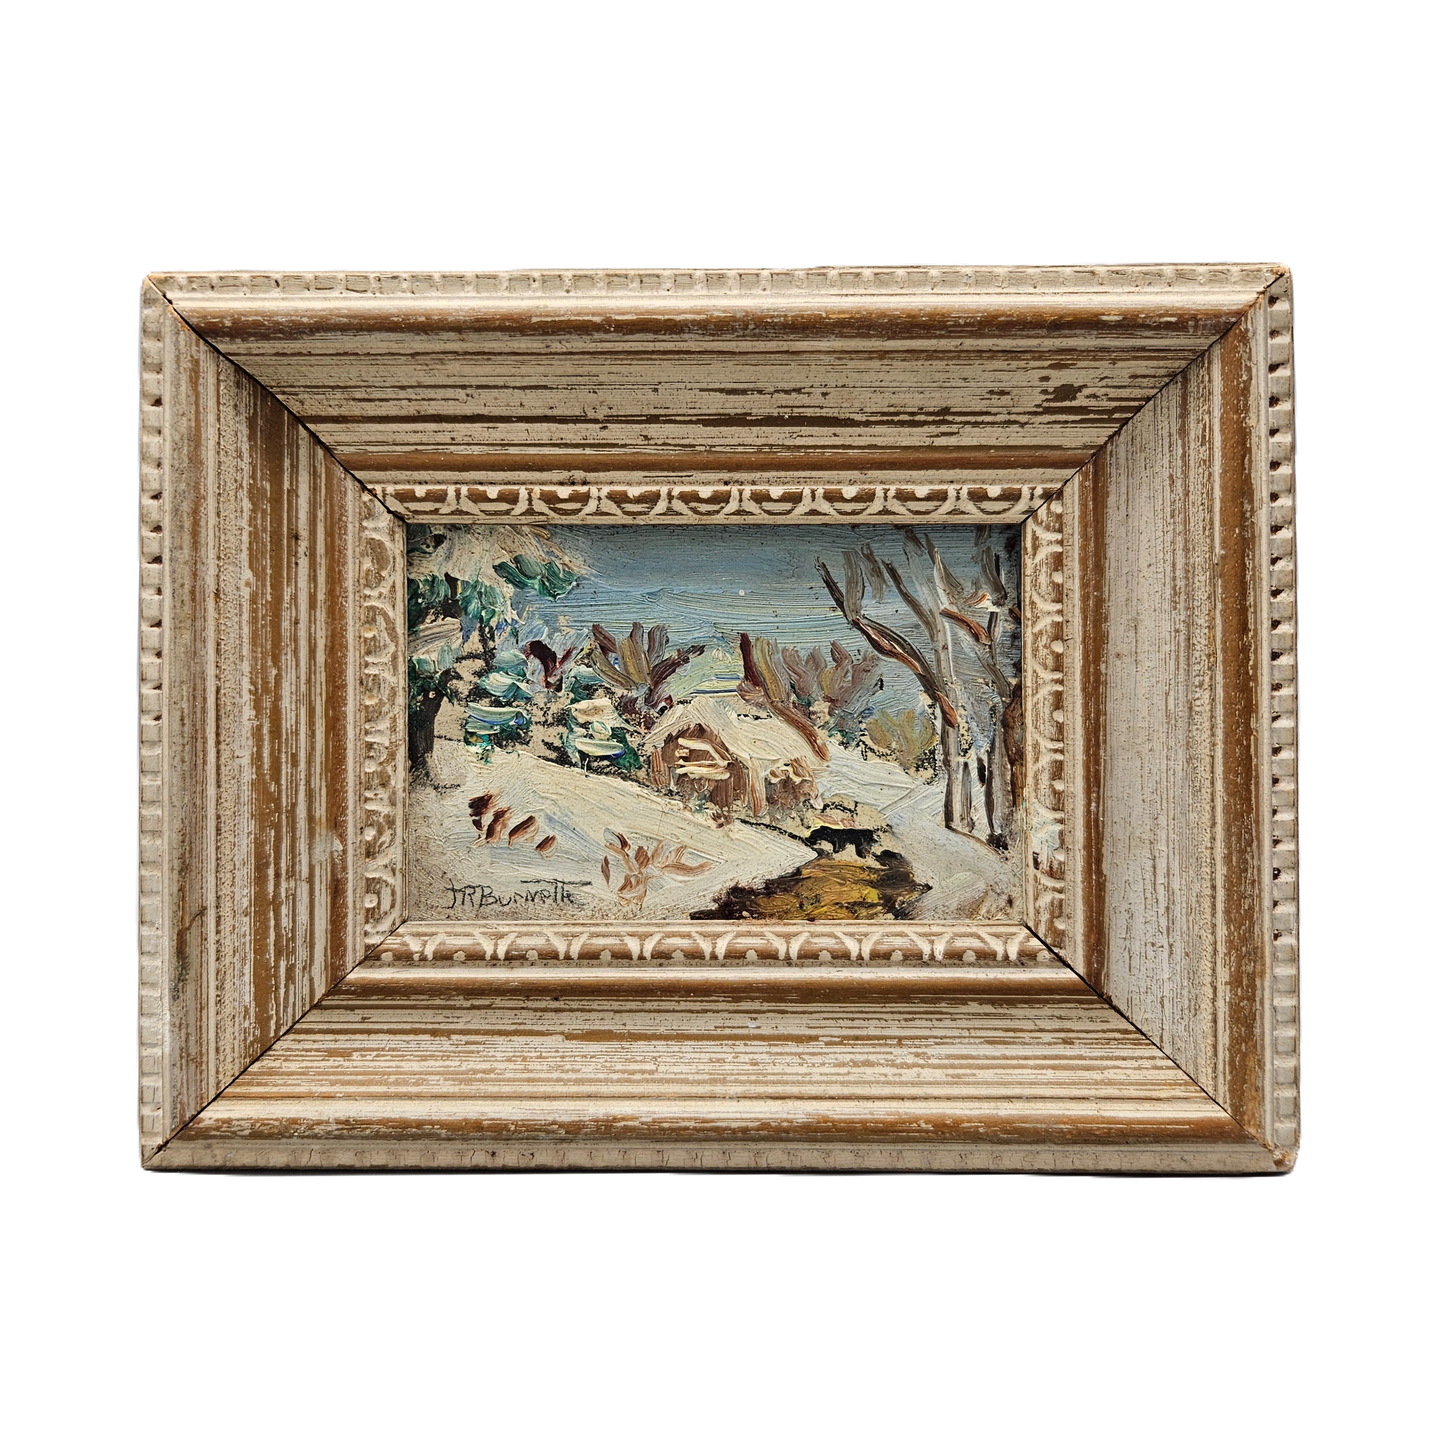 Vintage Small Miniature Signed Oil on Board Painting of Winter Scene in Wooden Frame